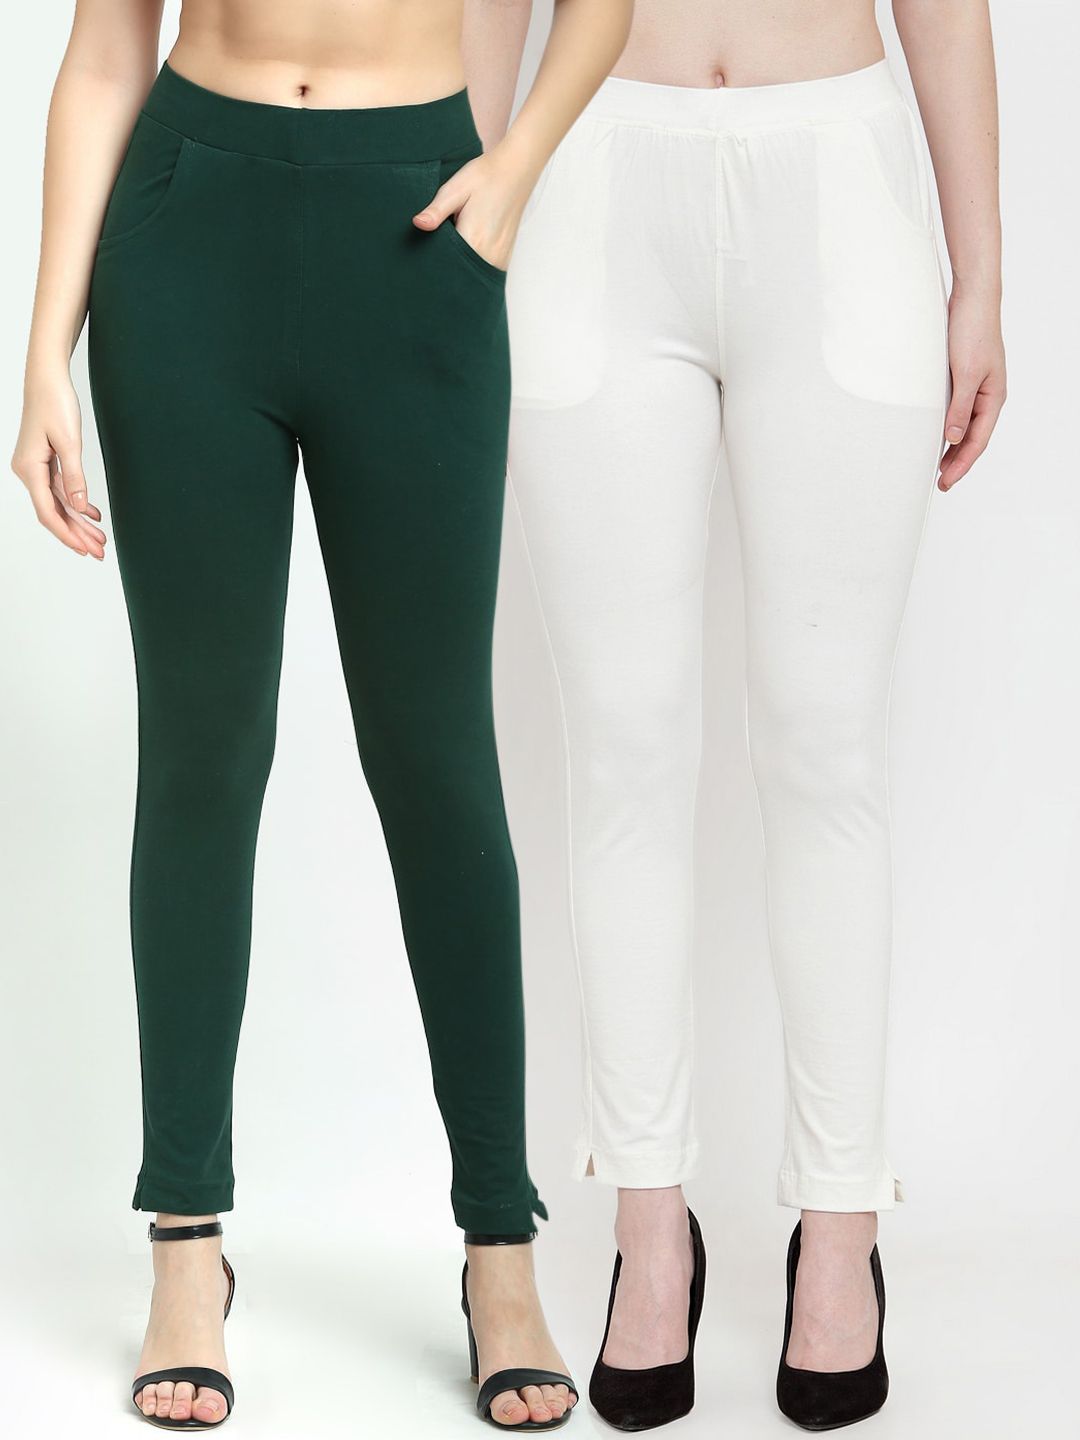 TAG 7 Women Set of 2 Green & White Solid Ankle-Length Leggings Price in India